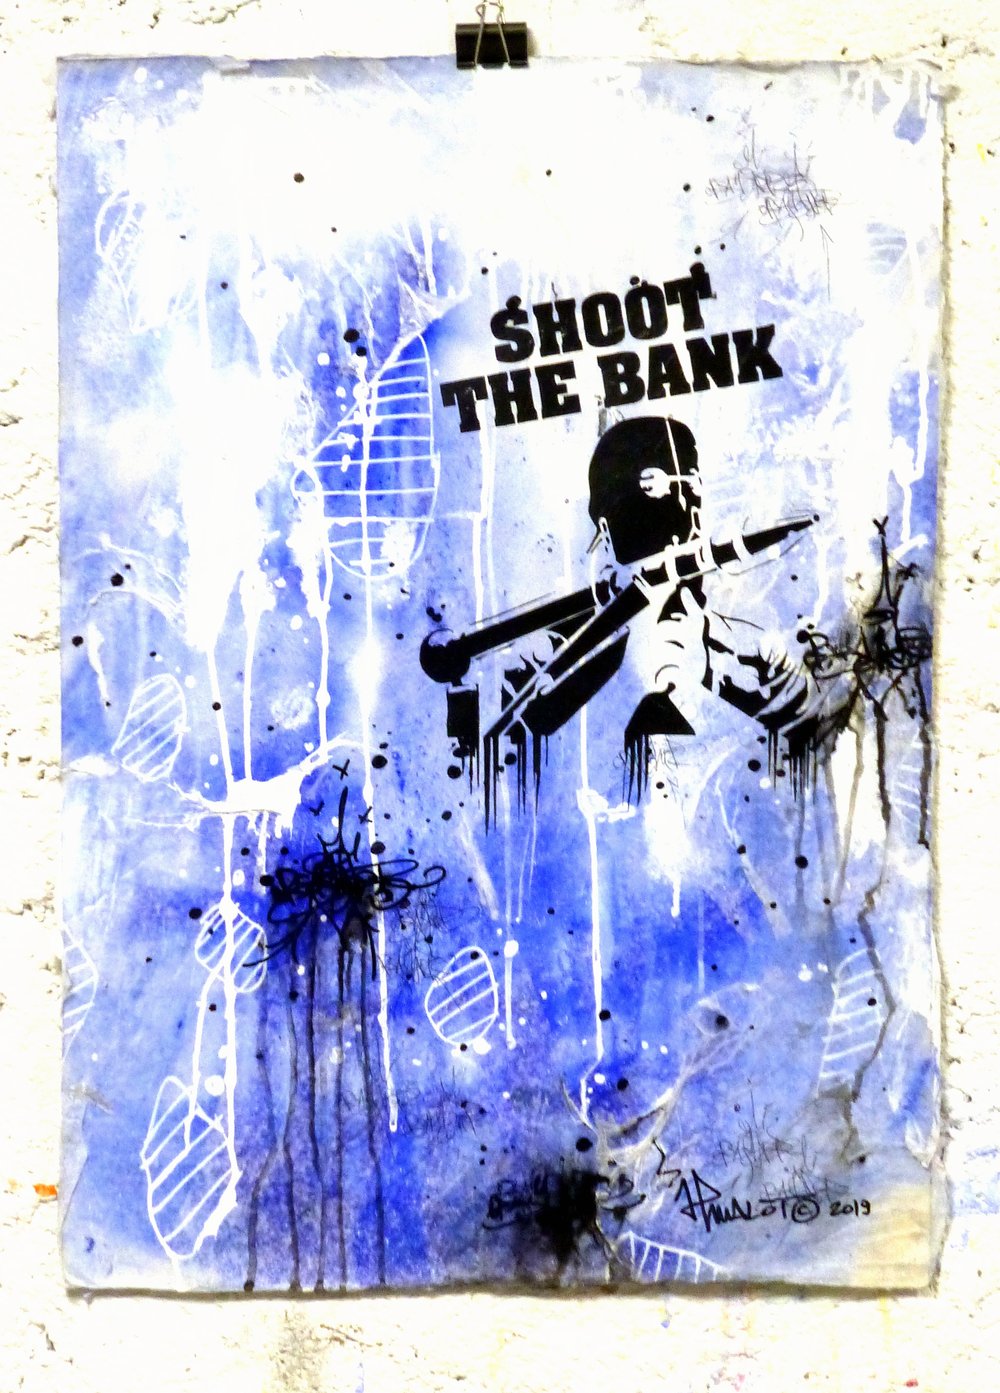 SHOOT THE BANK! On Blue. 2020